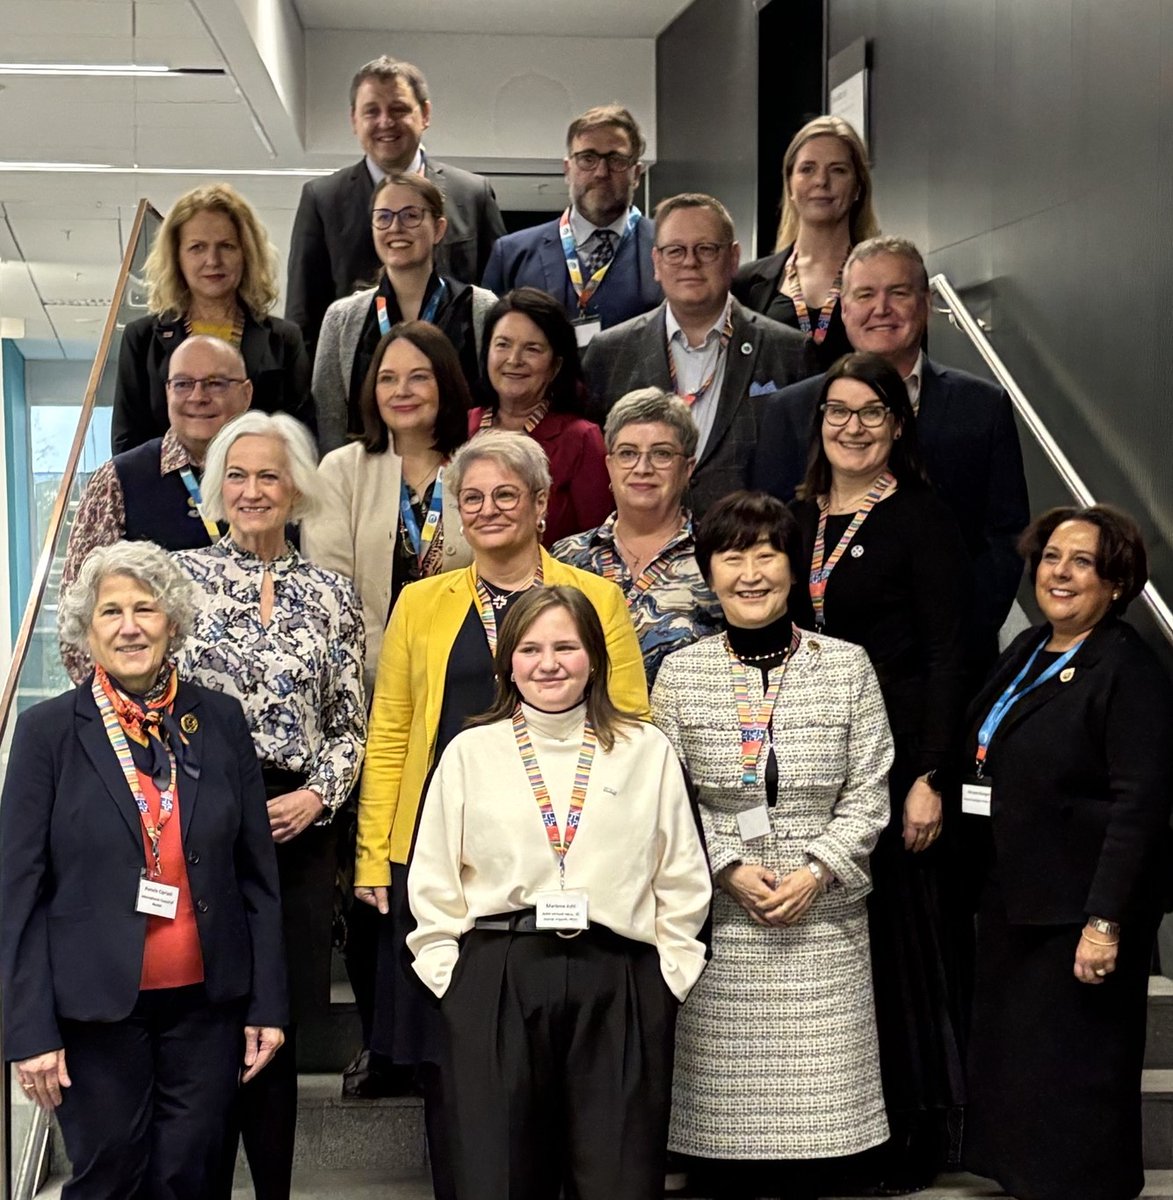 ICN President @PamCiprianoRN at International Workforce Forum in #Sweden with JSNO, @WHO & 12 leading National #Nurses Associations: “We must together shift #nursing from being invisible to invaluable. ICN will continue to fight for improvements in the working environment.”